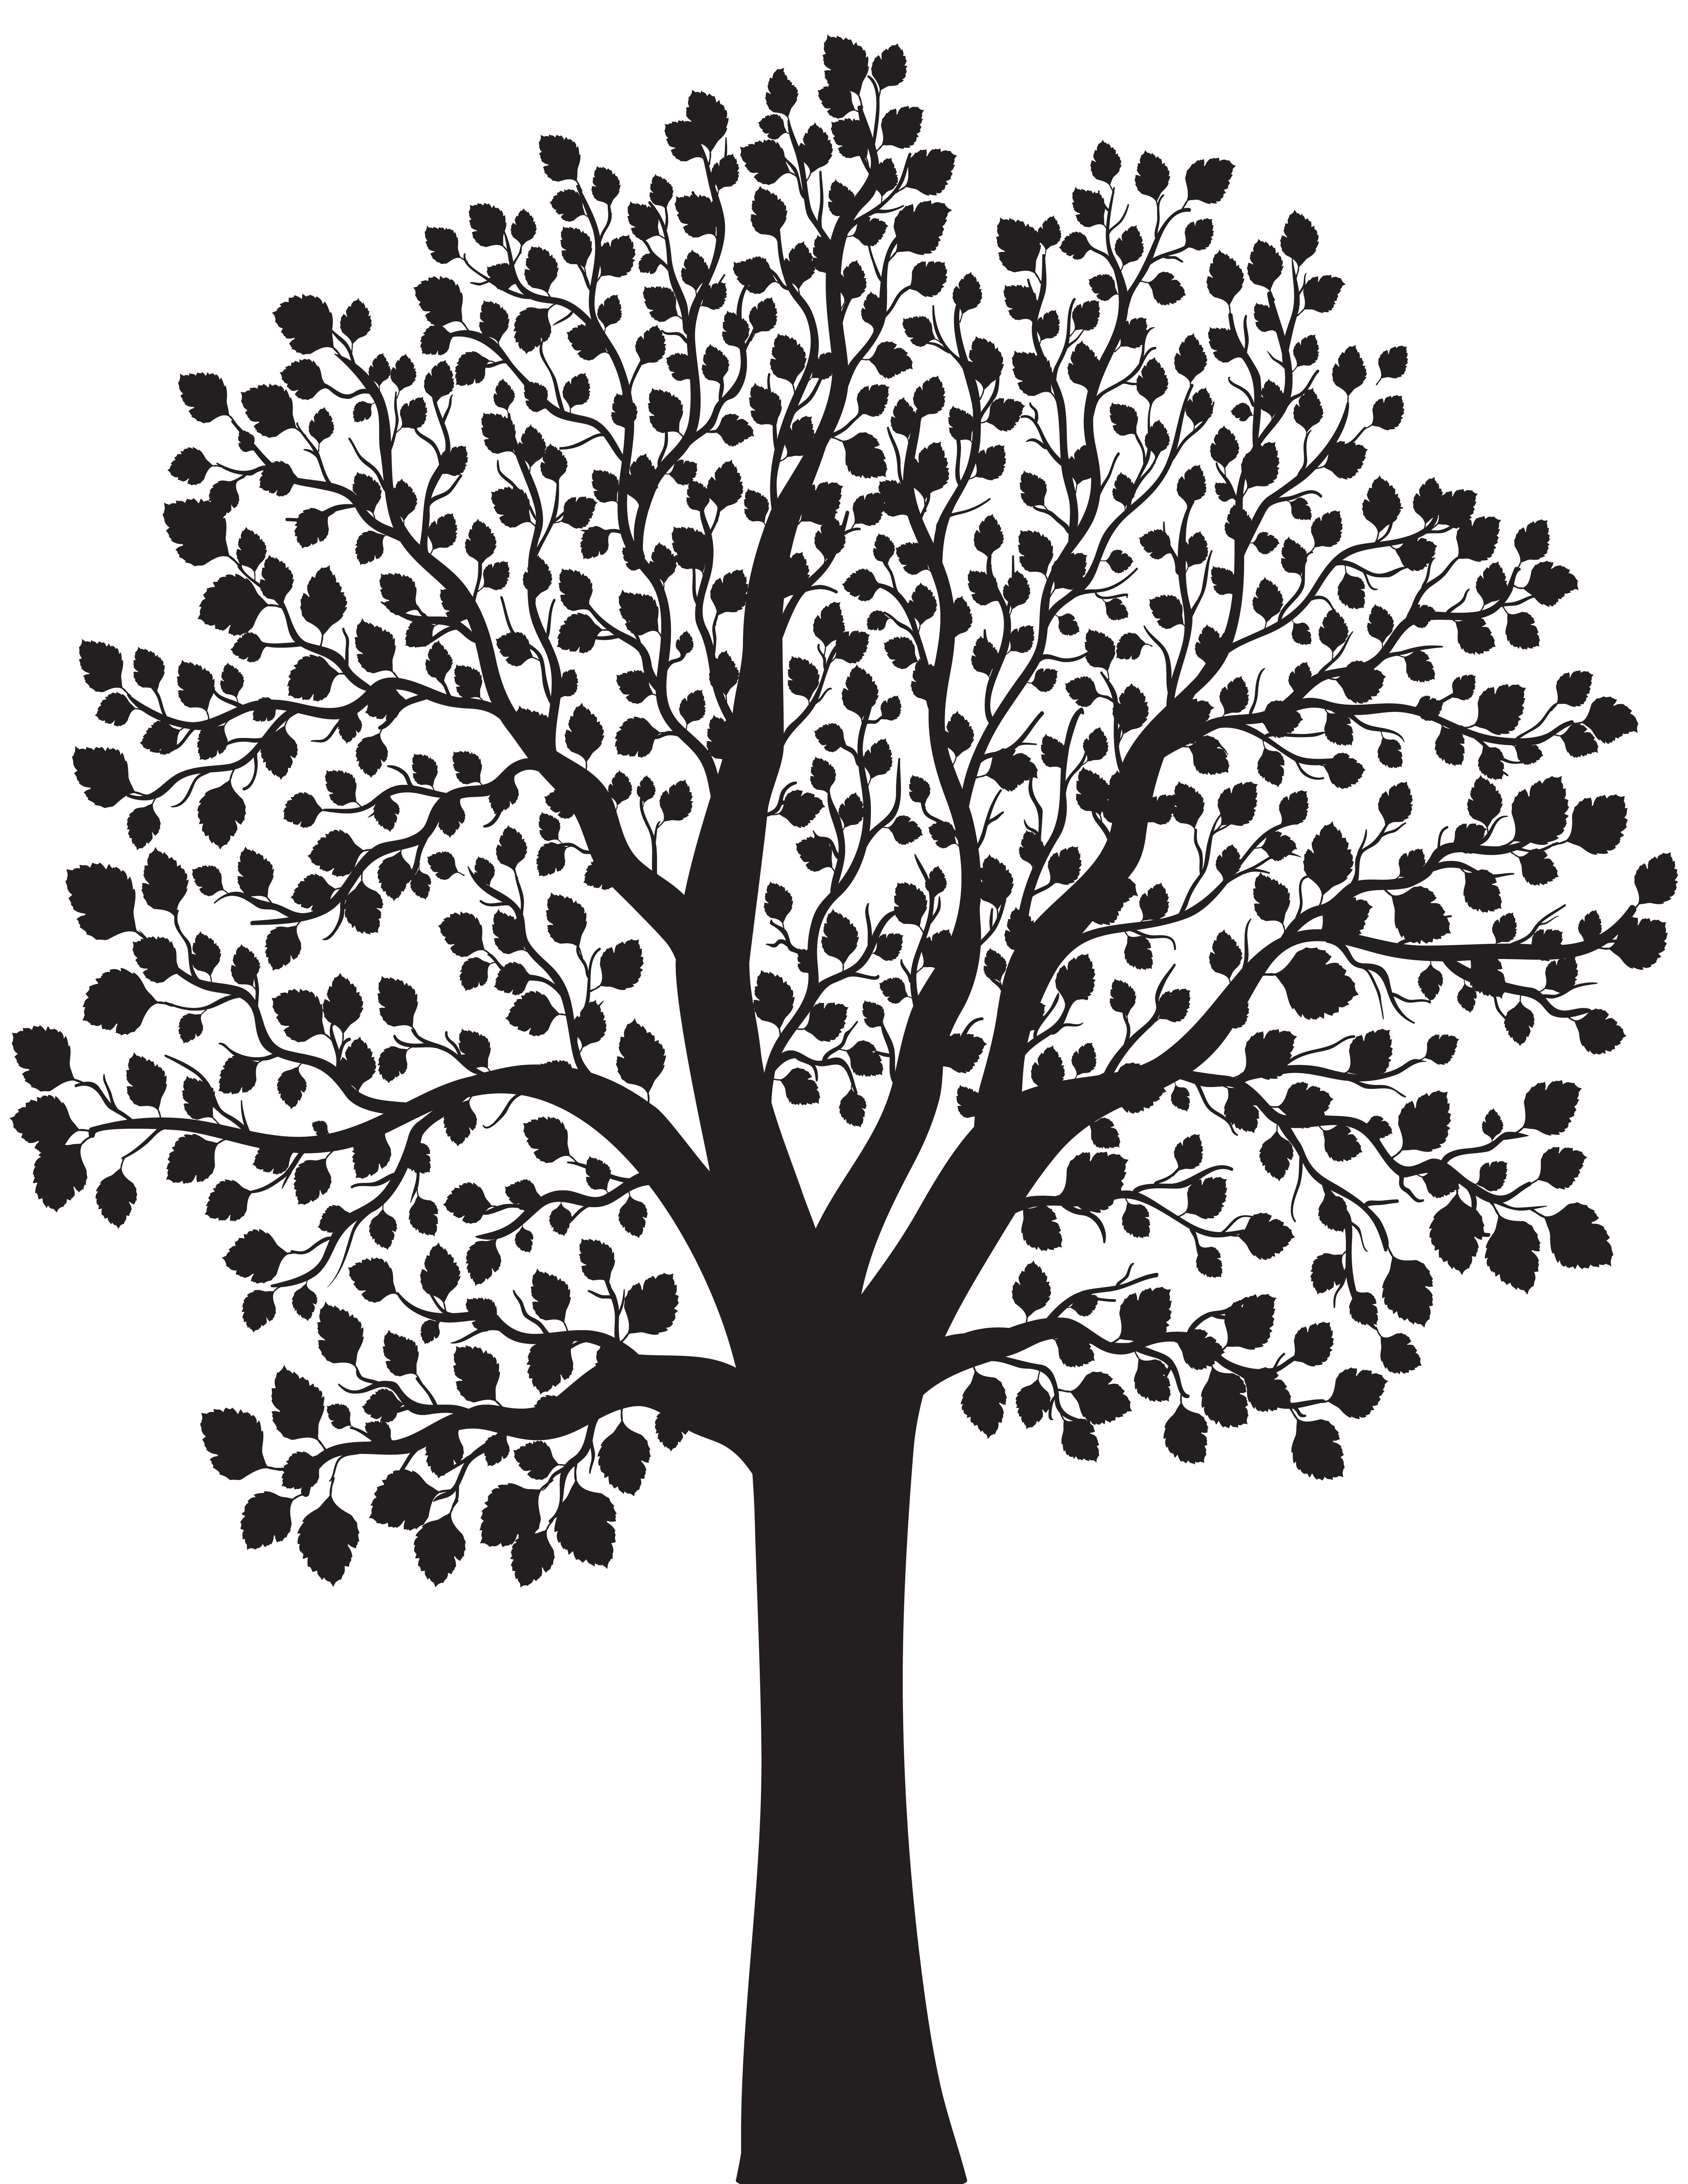 Tree Silhouette Illustration Tree Silhouette Png Clip Art Image Png 4288 The Best Porn Website